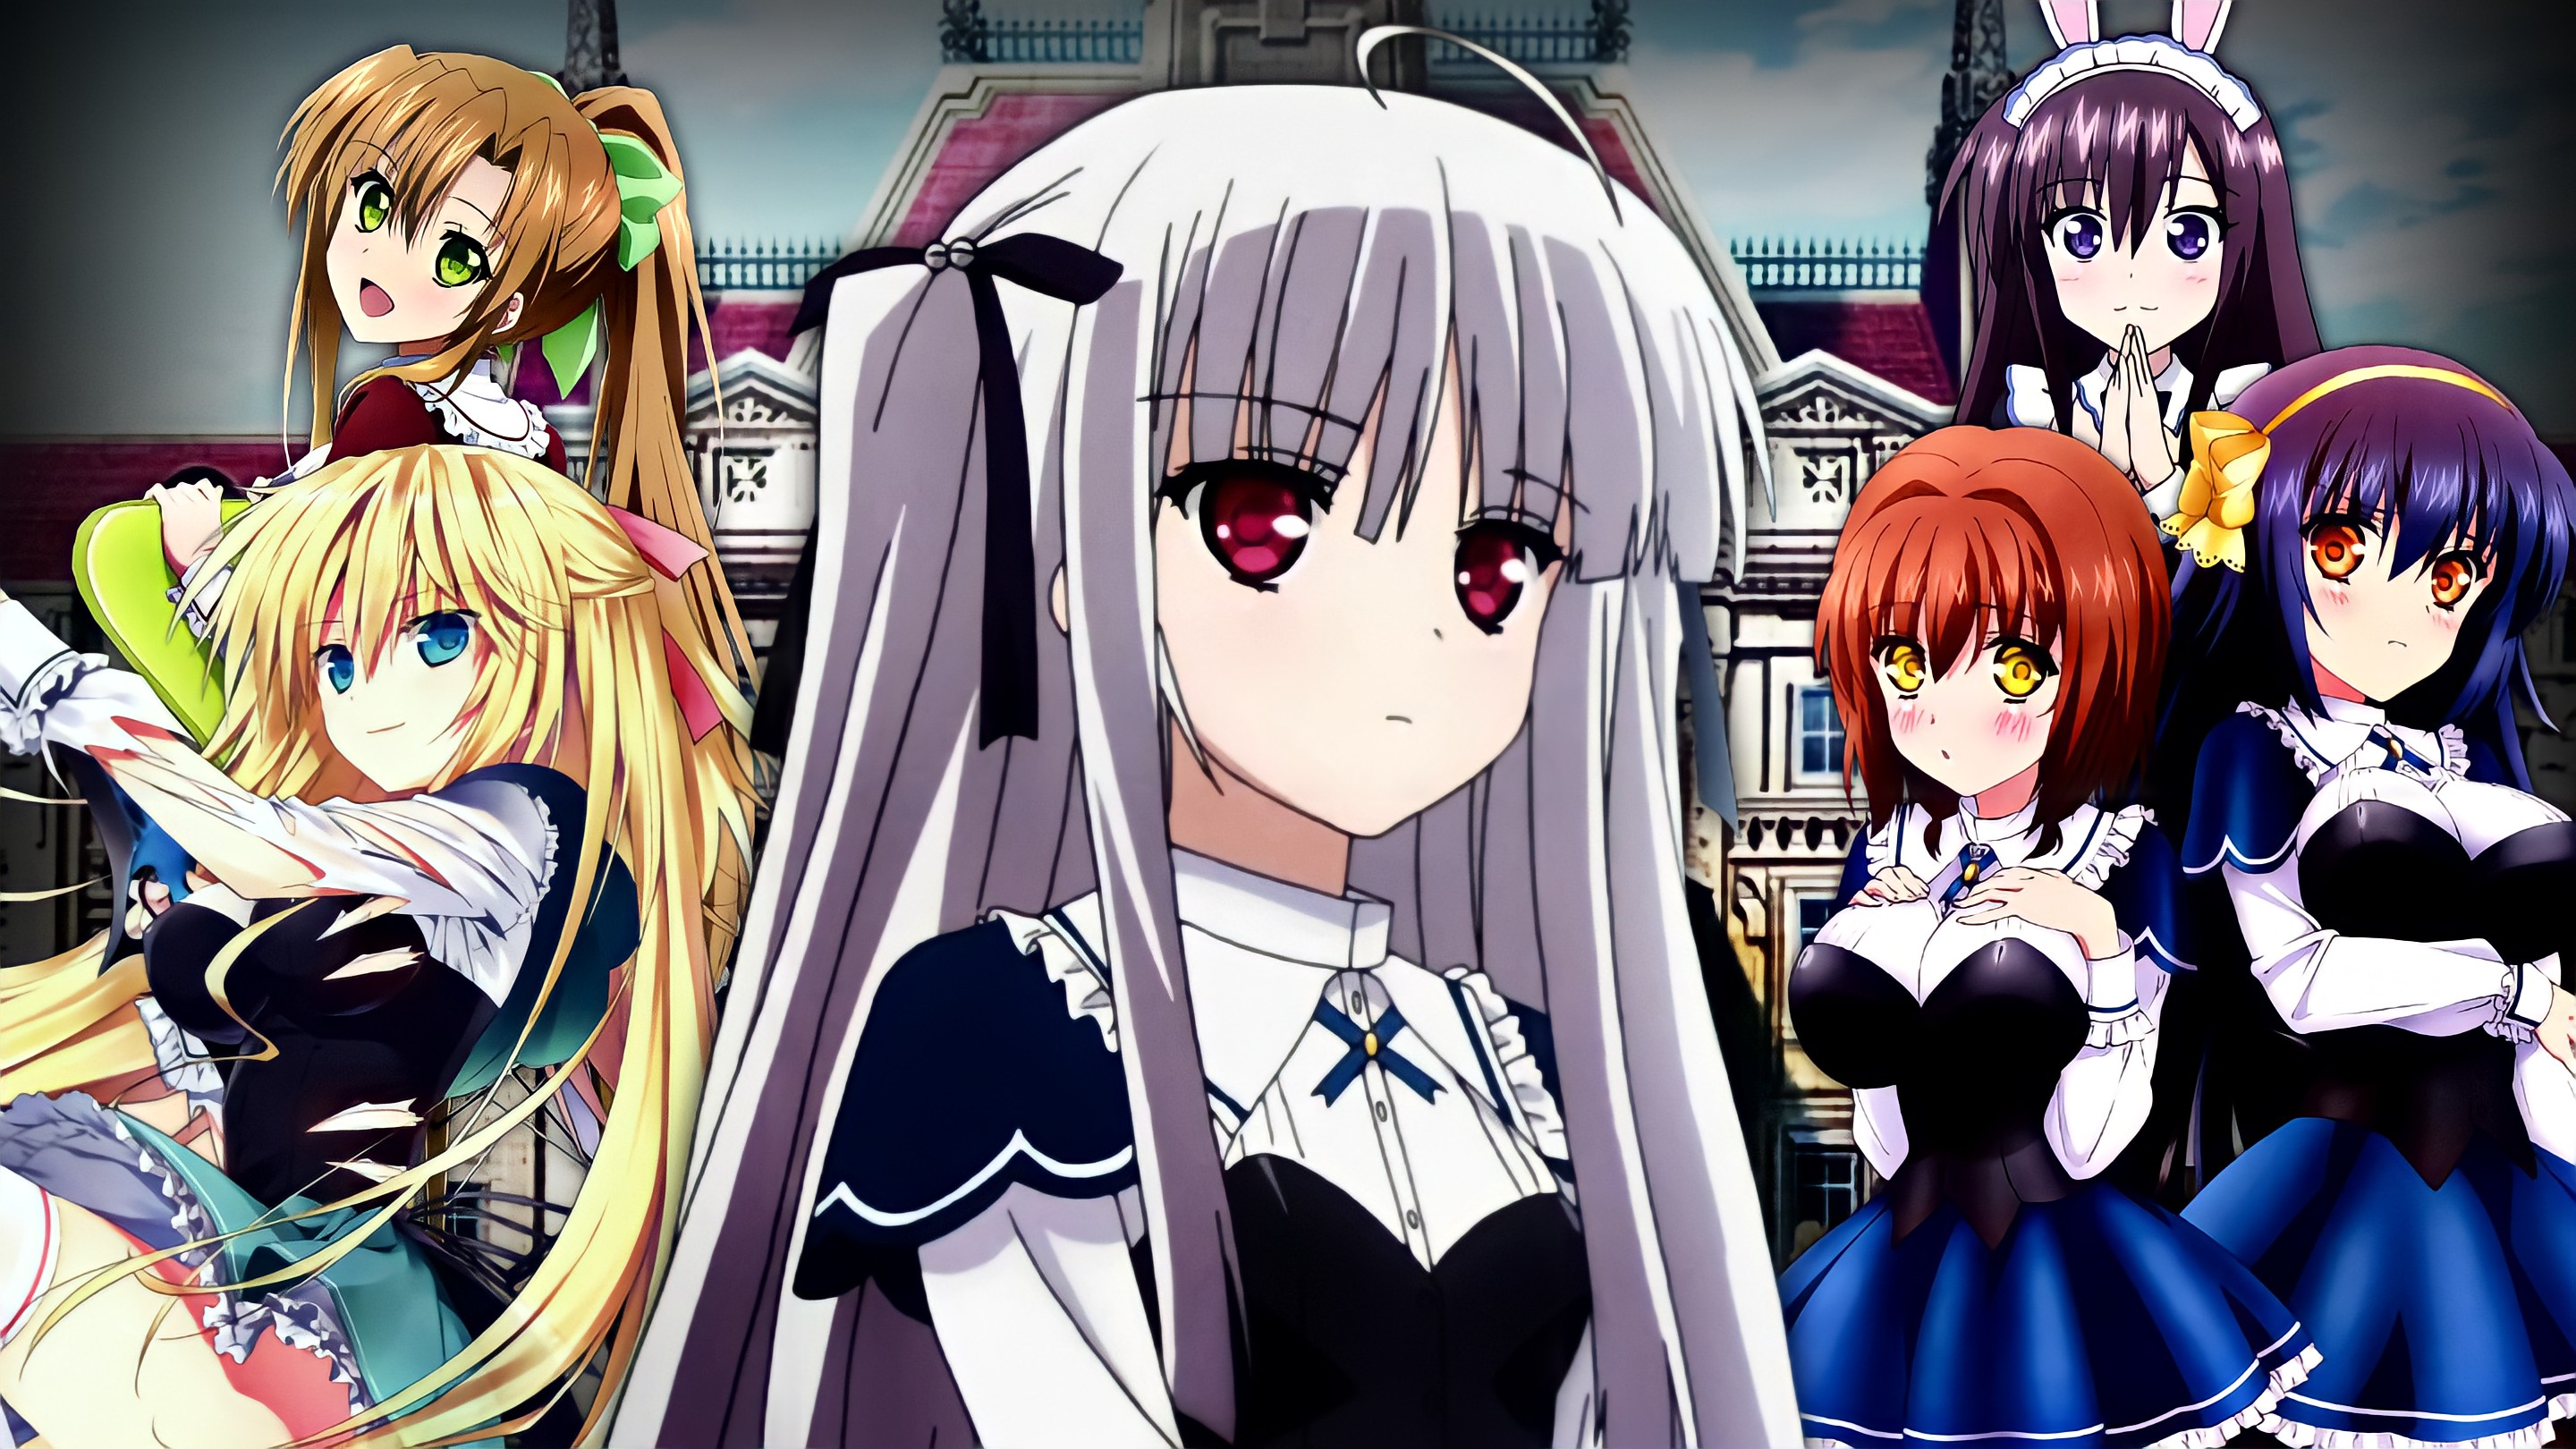 Absolute Duo 